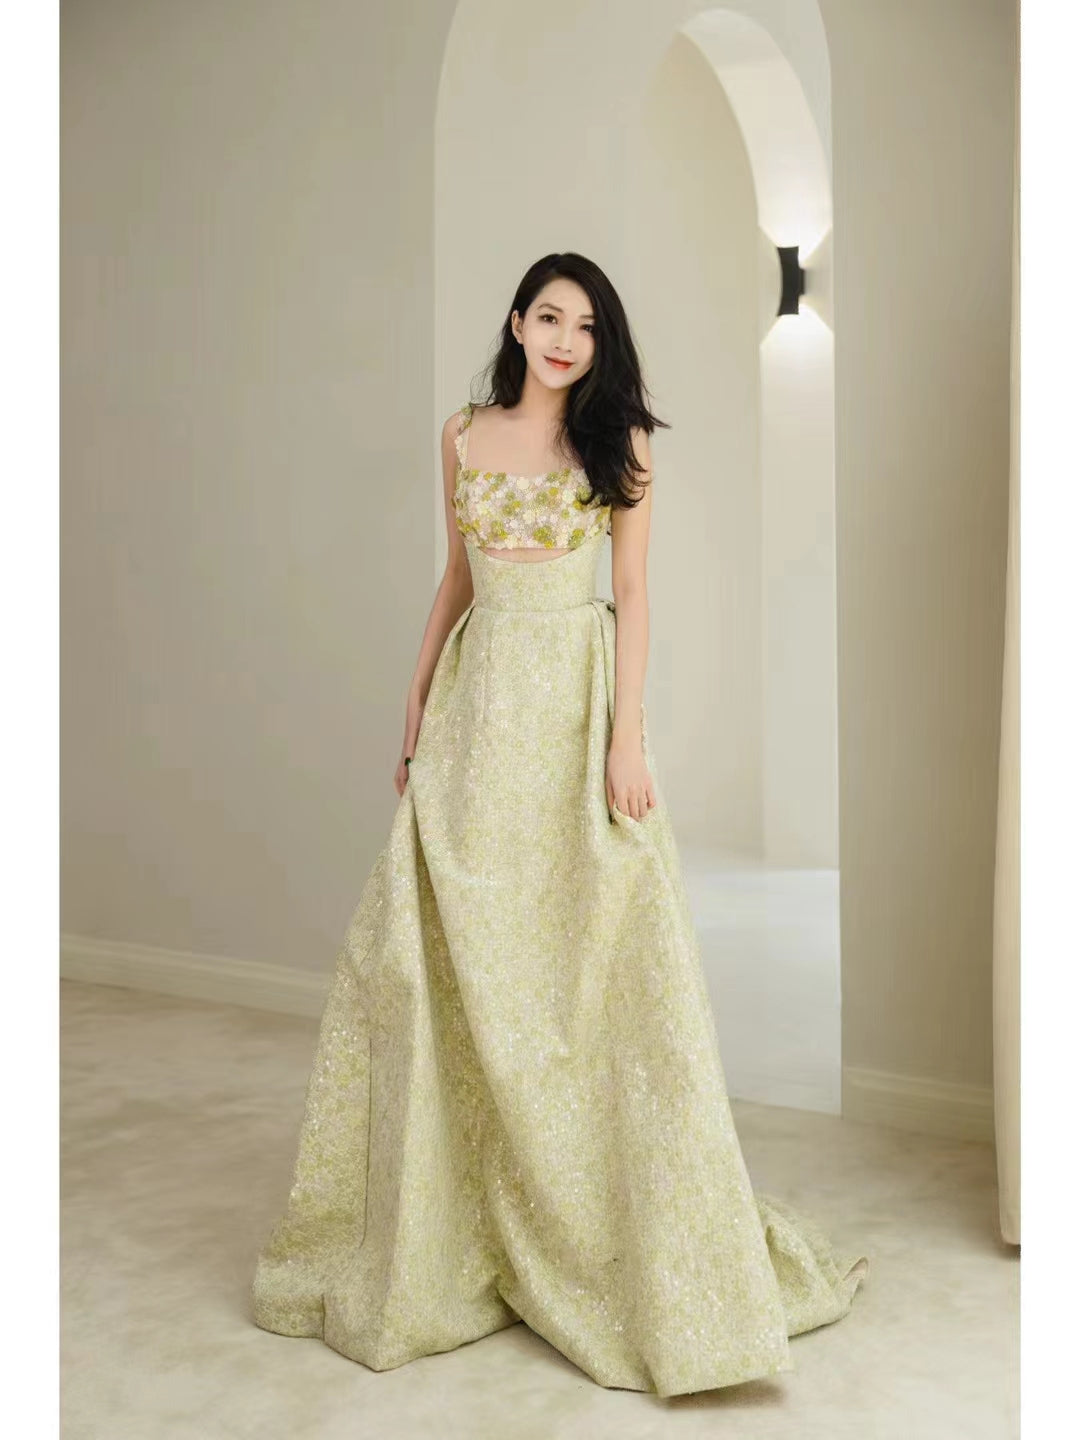 Sweetheart Green Floral Embroidery Prom Dresses, Elegant Newest Prom Dresses